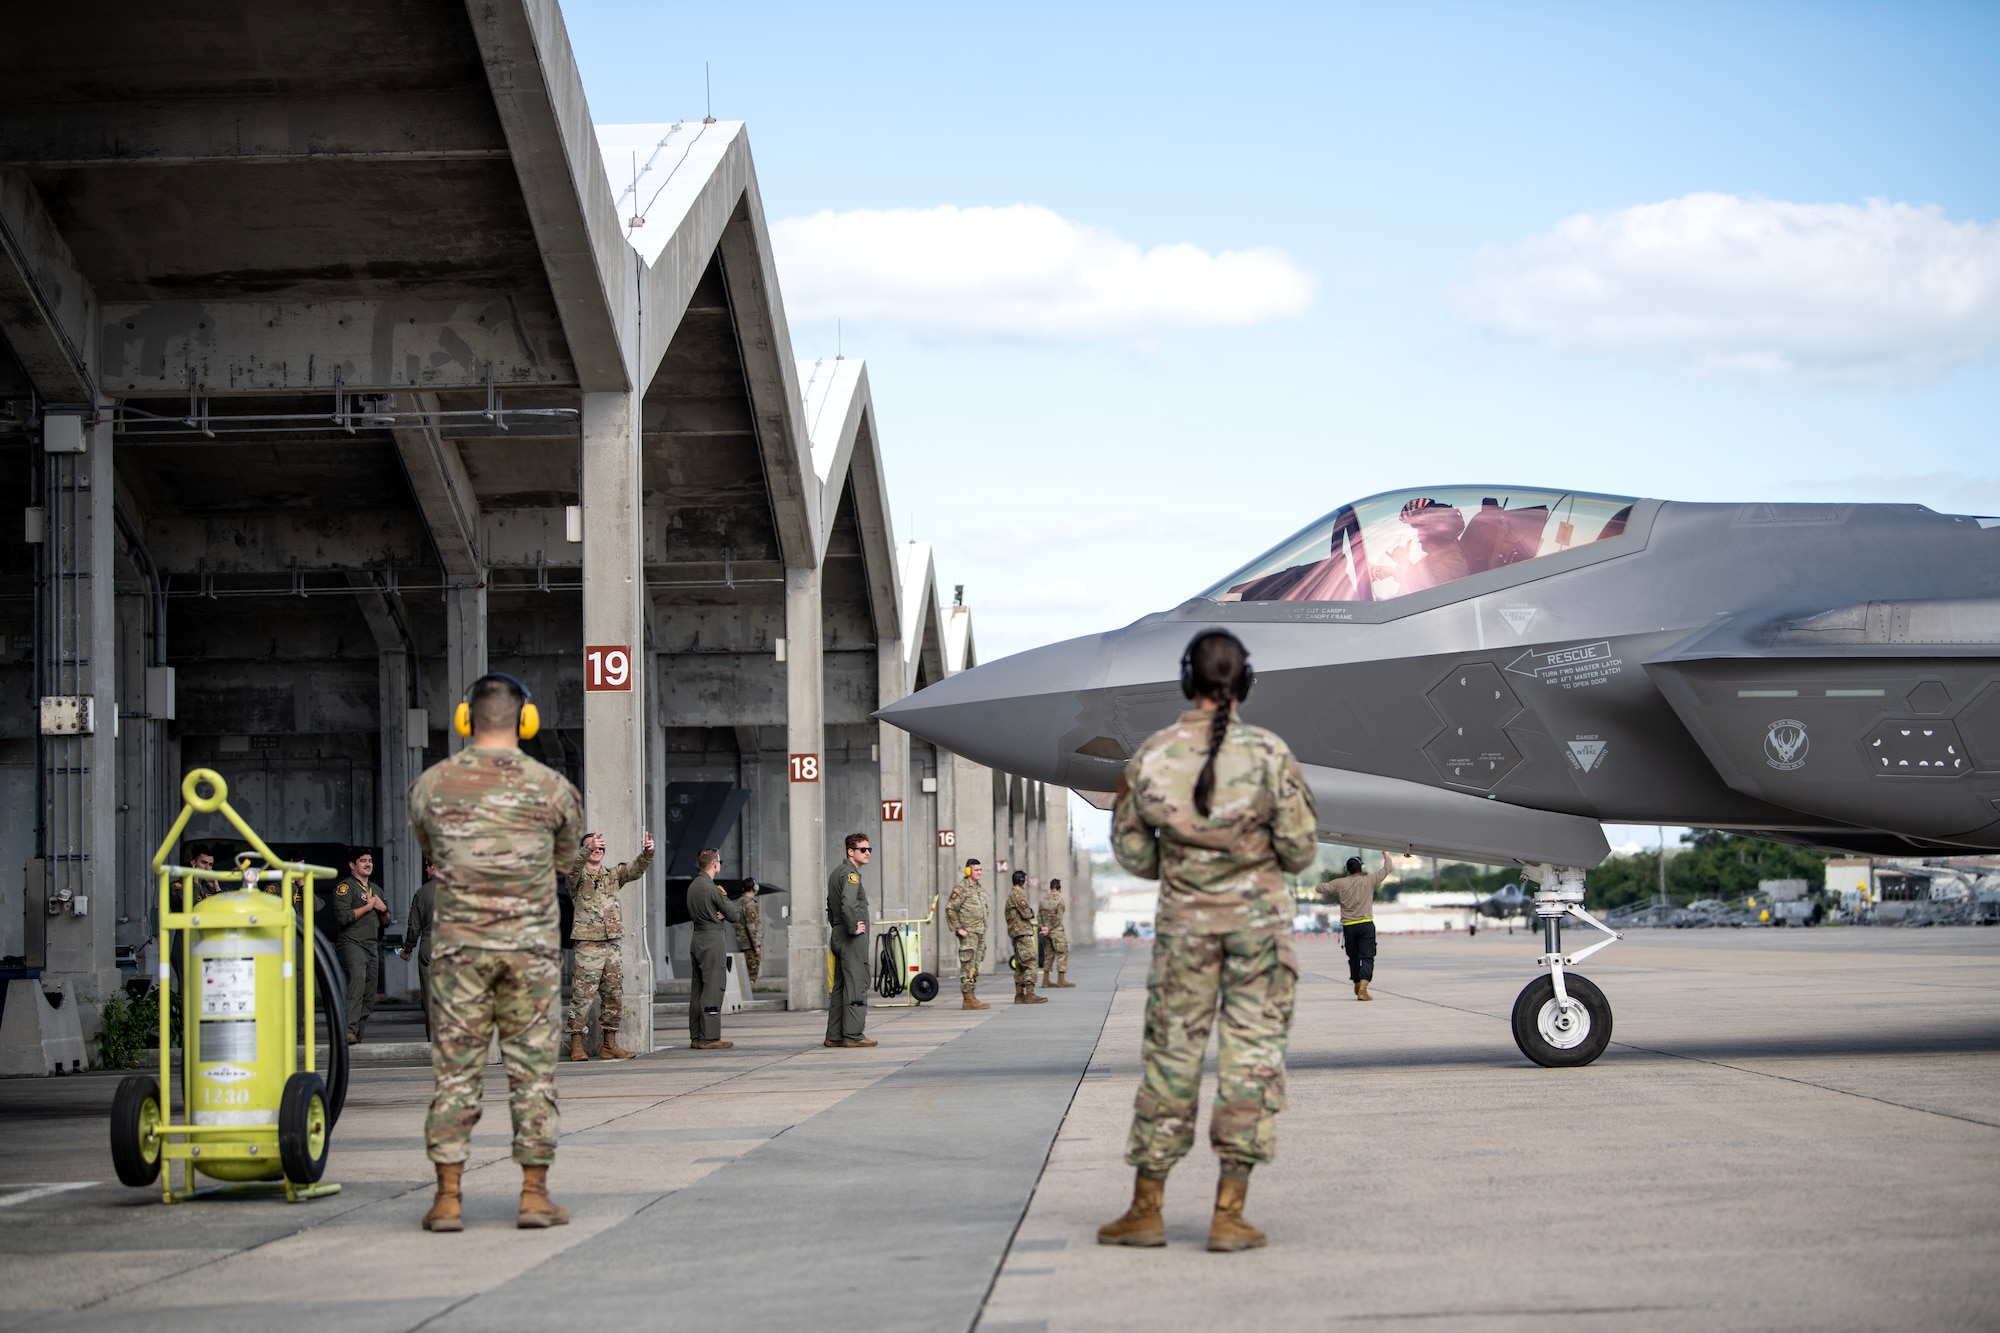 U.S. Air Force Airmen from Hill Air Force Base, Utah, greet one of their F-35A Lightning II pilots as he arrives at Kadena Air Base, Japan, Nov. 20, 2023. The 4th FS will be joining the 356th Fighter Squadron from Eielson AFB, Alaska, in providing forward-deployed, fifth-generation fighter capabilities to assure allies and deter threats in the Indo-Pacific region. (U.S. Air Force photo by Staff Sgt. Jessi Roth)